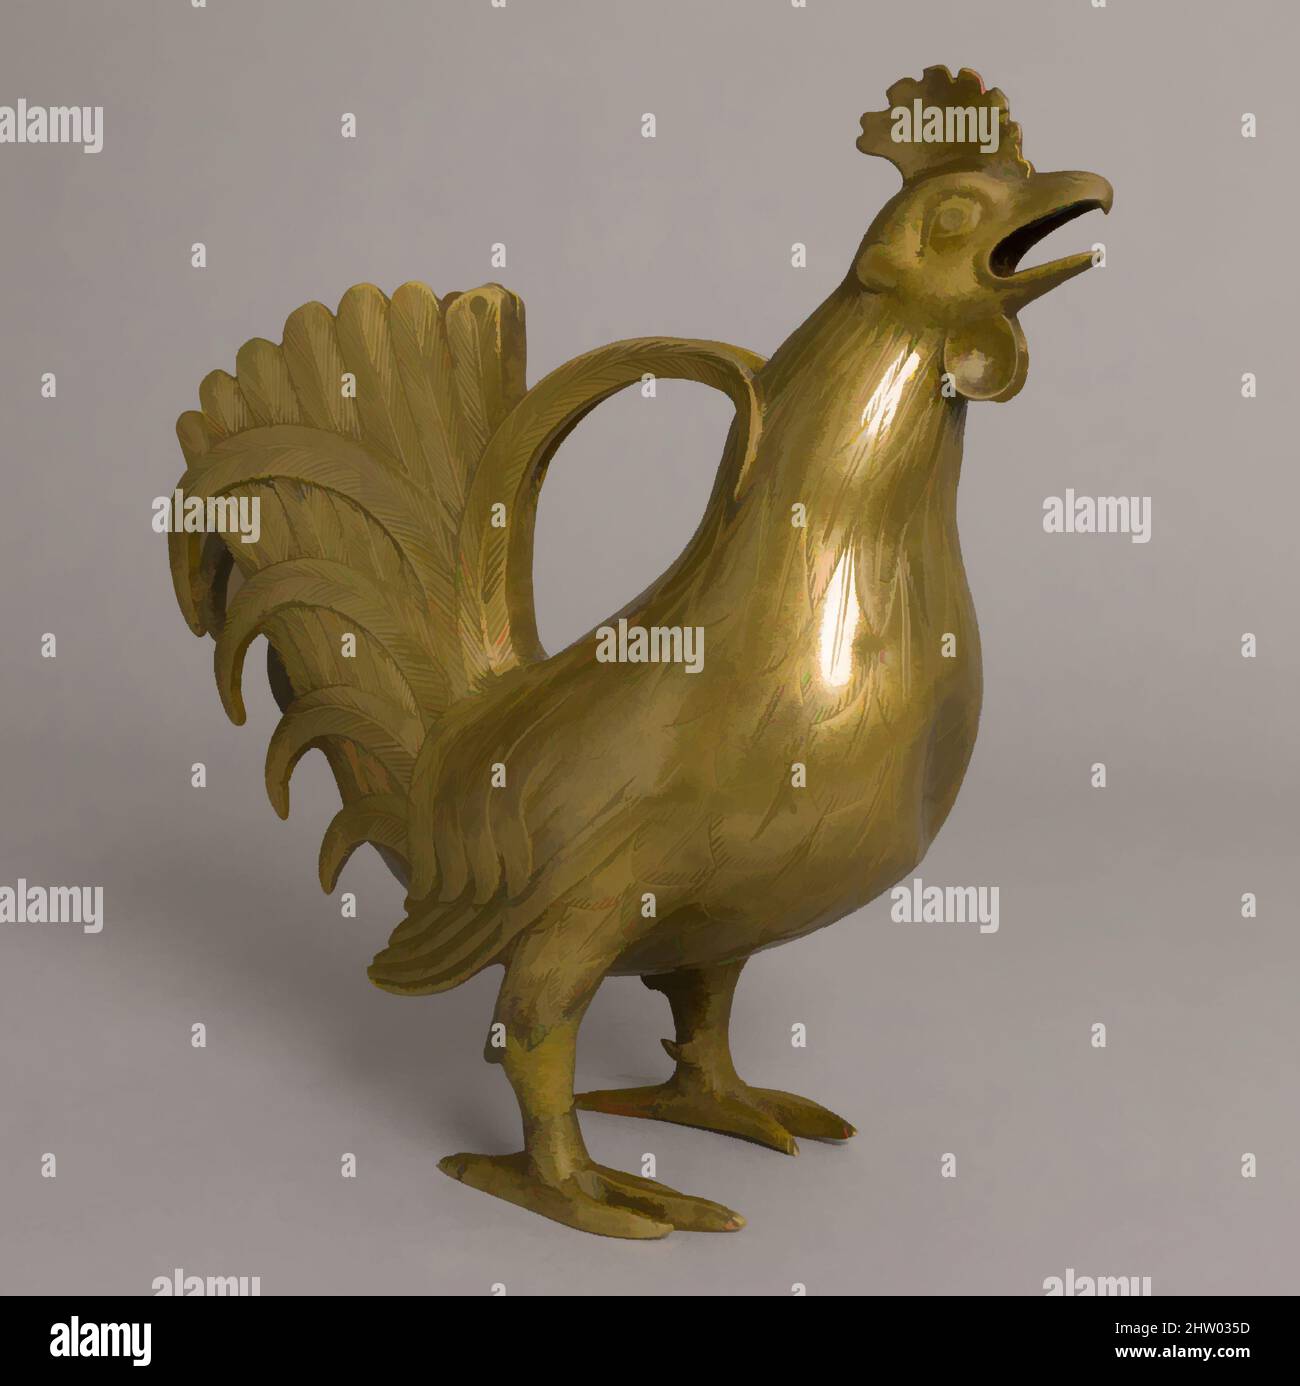 Art inspired by Aquamanile in the Form of a Rooster, 13th century, Made in Lower Saxony, Germany, German, Copper alloy, Overall: 9 15/16 x 9 9/16 x 3 9/16 in., 3lb. (25.2 x 24.3 x 9 cm, 1618g), Metalwork-Copper alloy, A carefully observed, naturalistic sculpture in the round, this, Classic works modernized by Artotop with a splash of modernity. Shapes, color and value, eye-catching visual impact on art. Emotions through freedom of artworks in a contemporary way. A timeless message pursuing a wildly creative new direction. Artists turning to the digital medium and creating the Artotop NFT Stock Photo